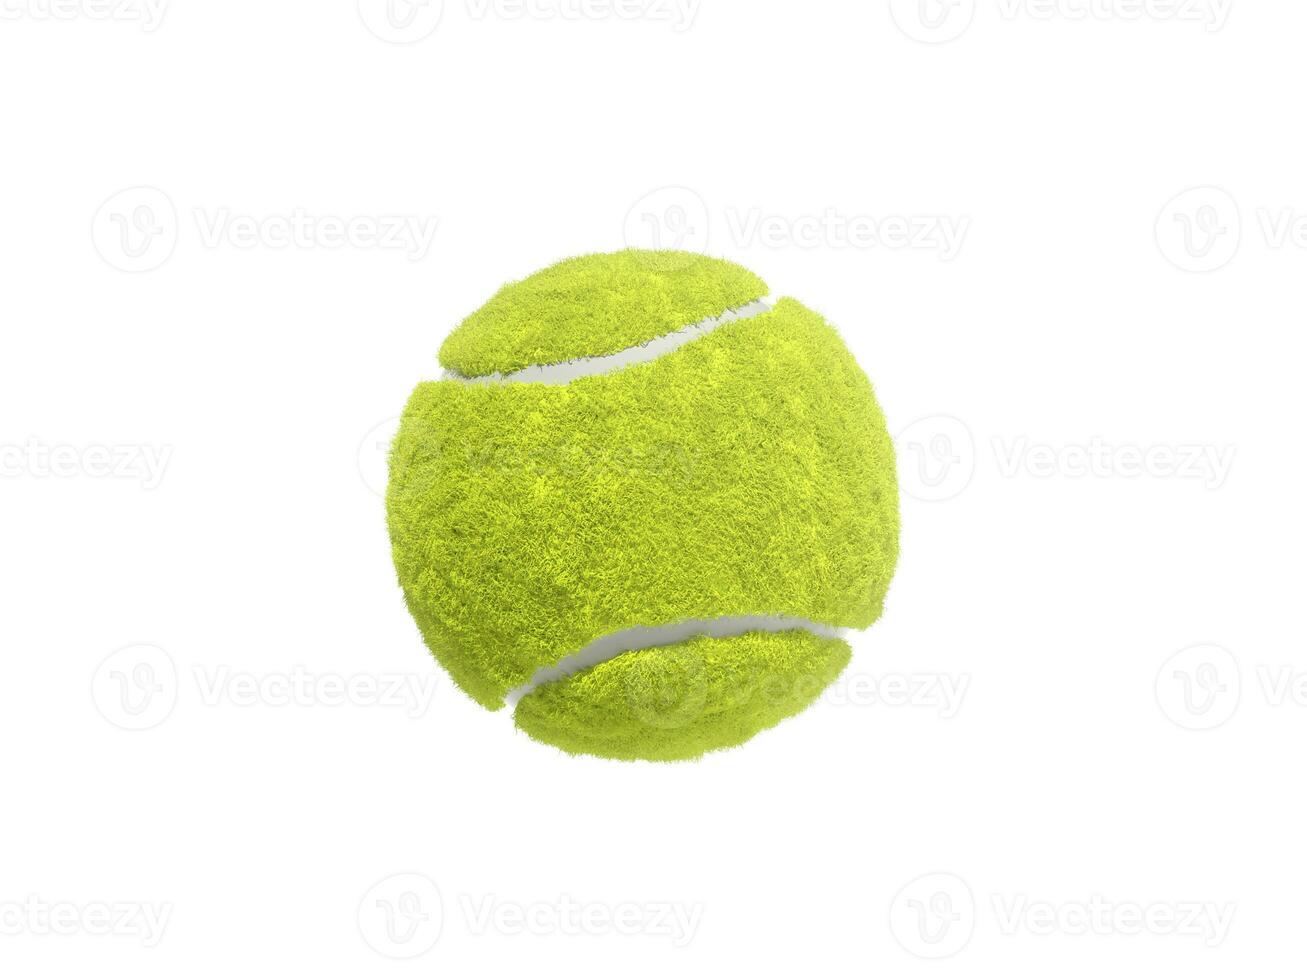 Tennis ball isolated without shadow photo